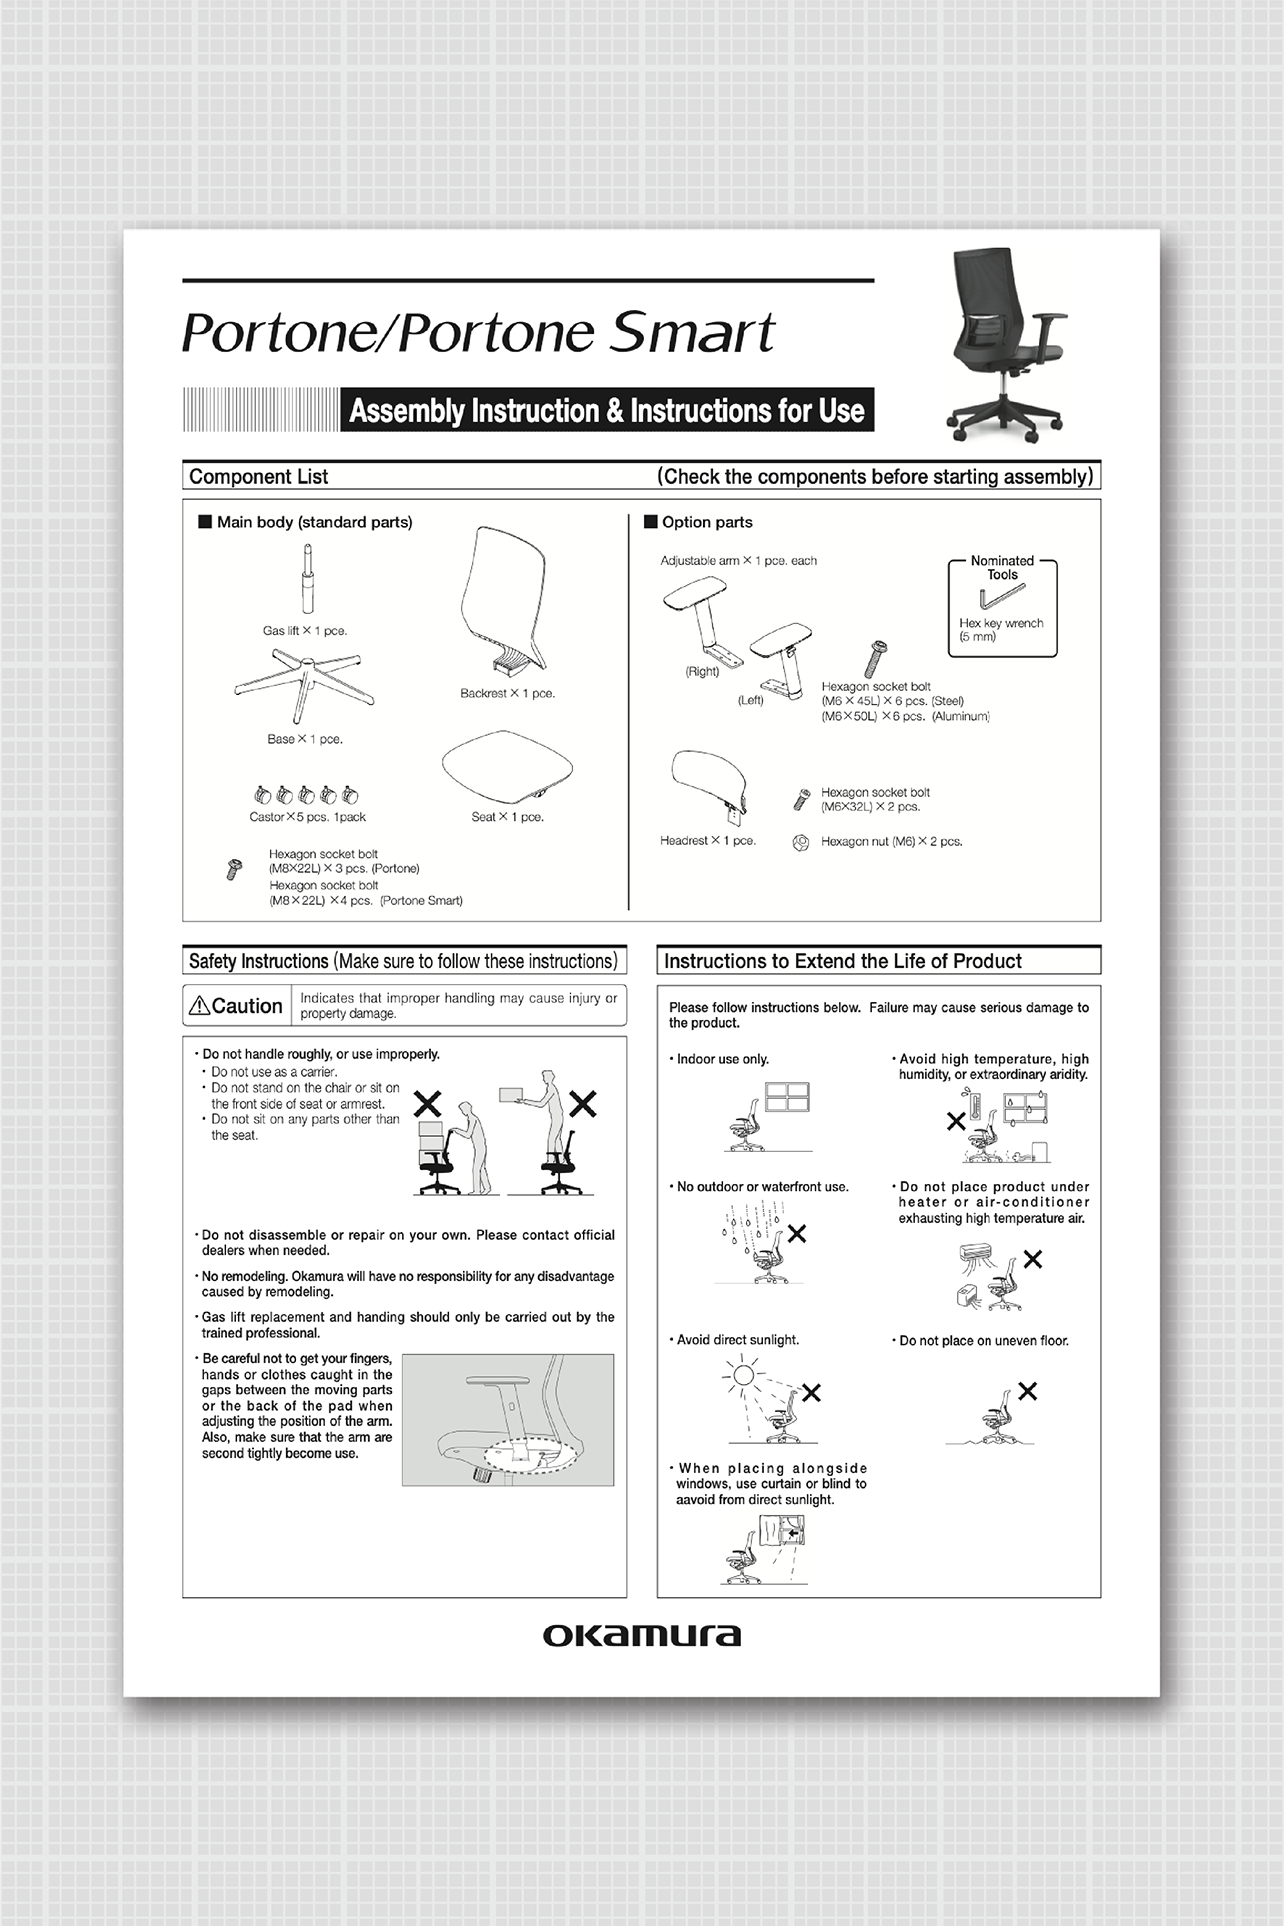 Portone Instructions for Use